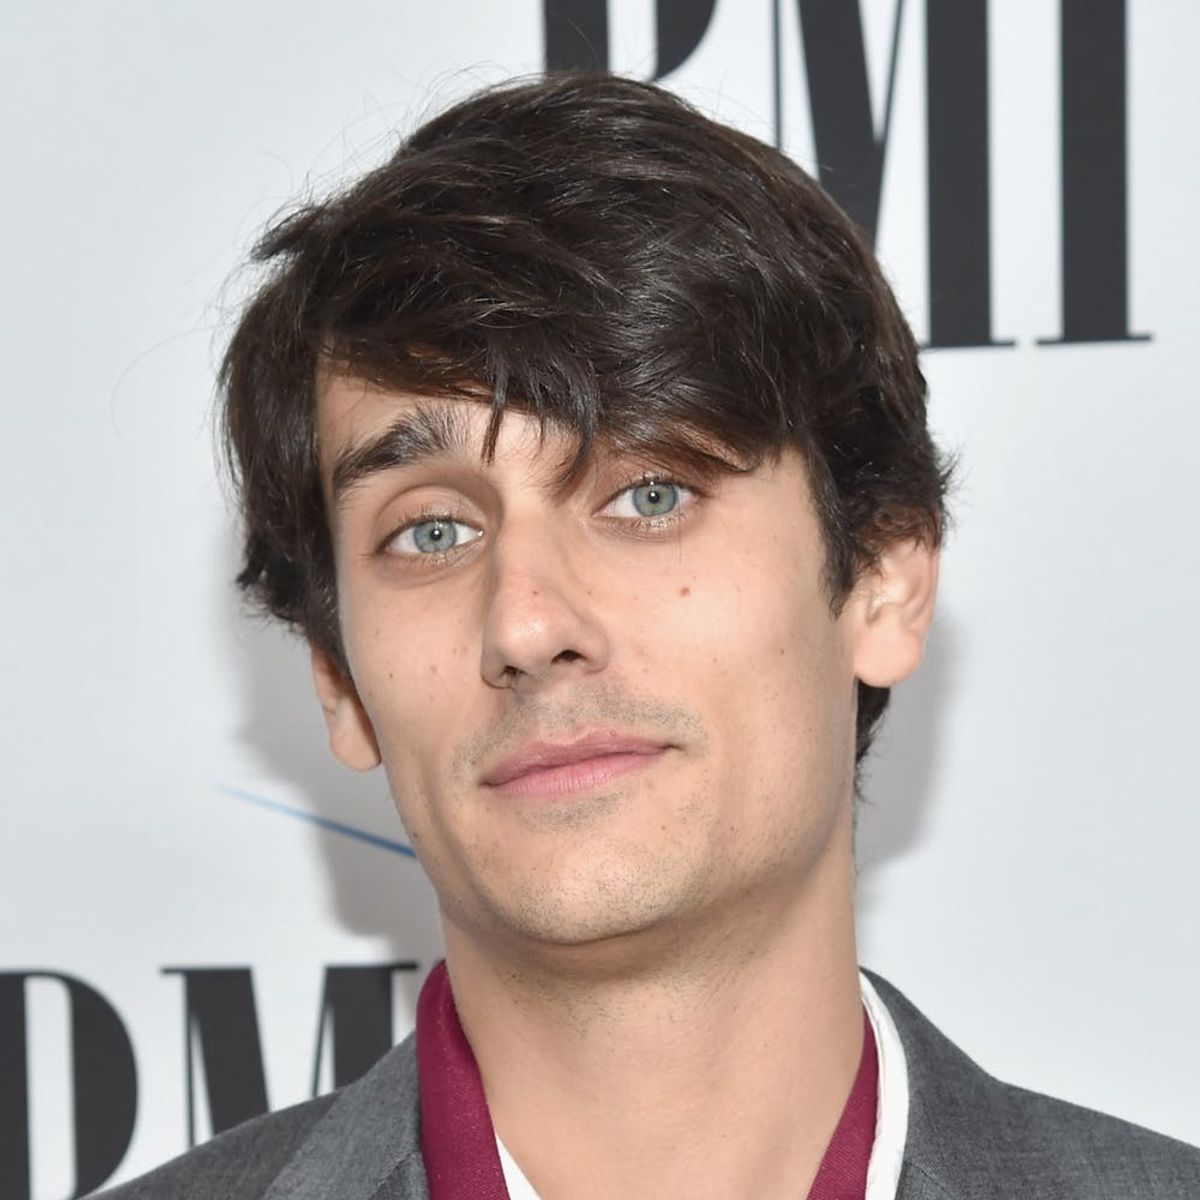 “For You I Will” Singer Teddy Geiger Is Transitioning